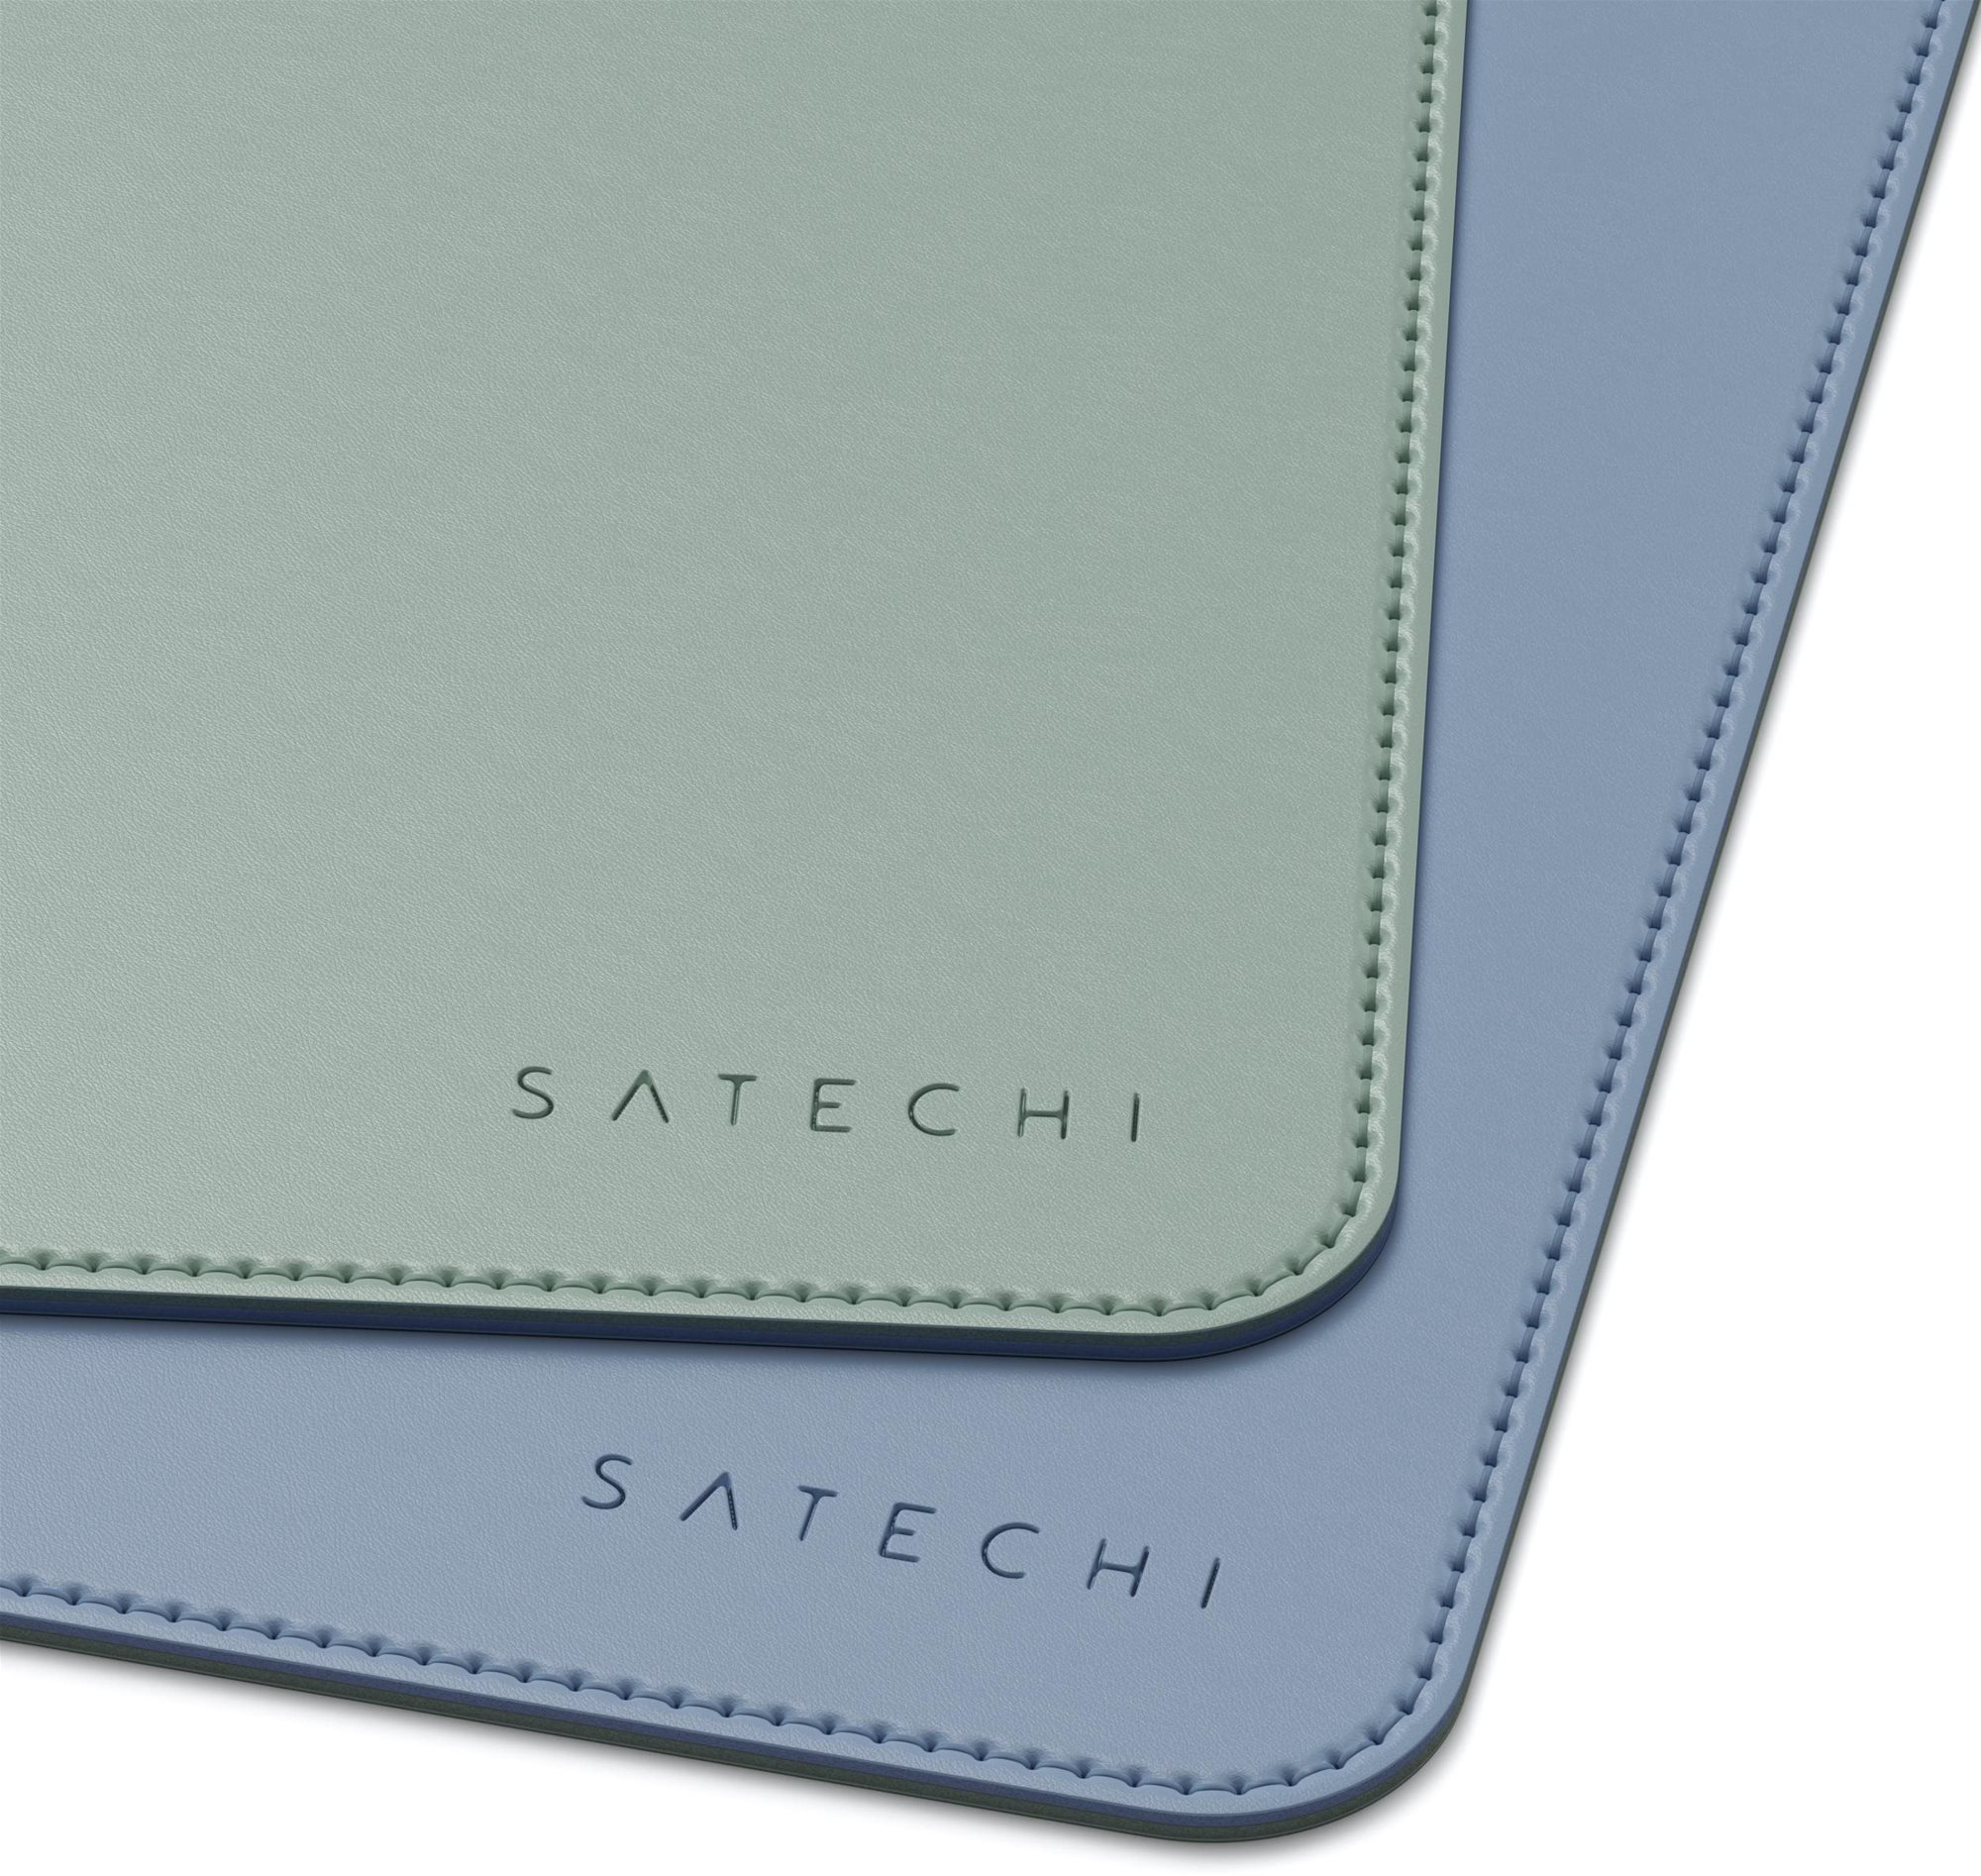 Satechi dual sided Eco-leather Deskmate - Blue/Green